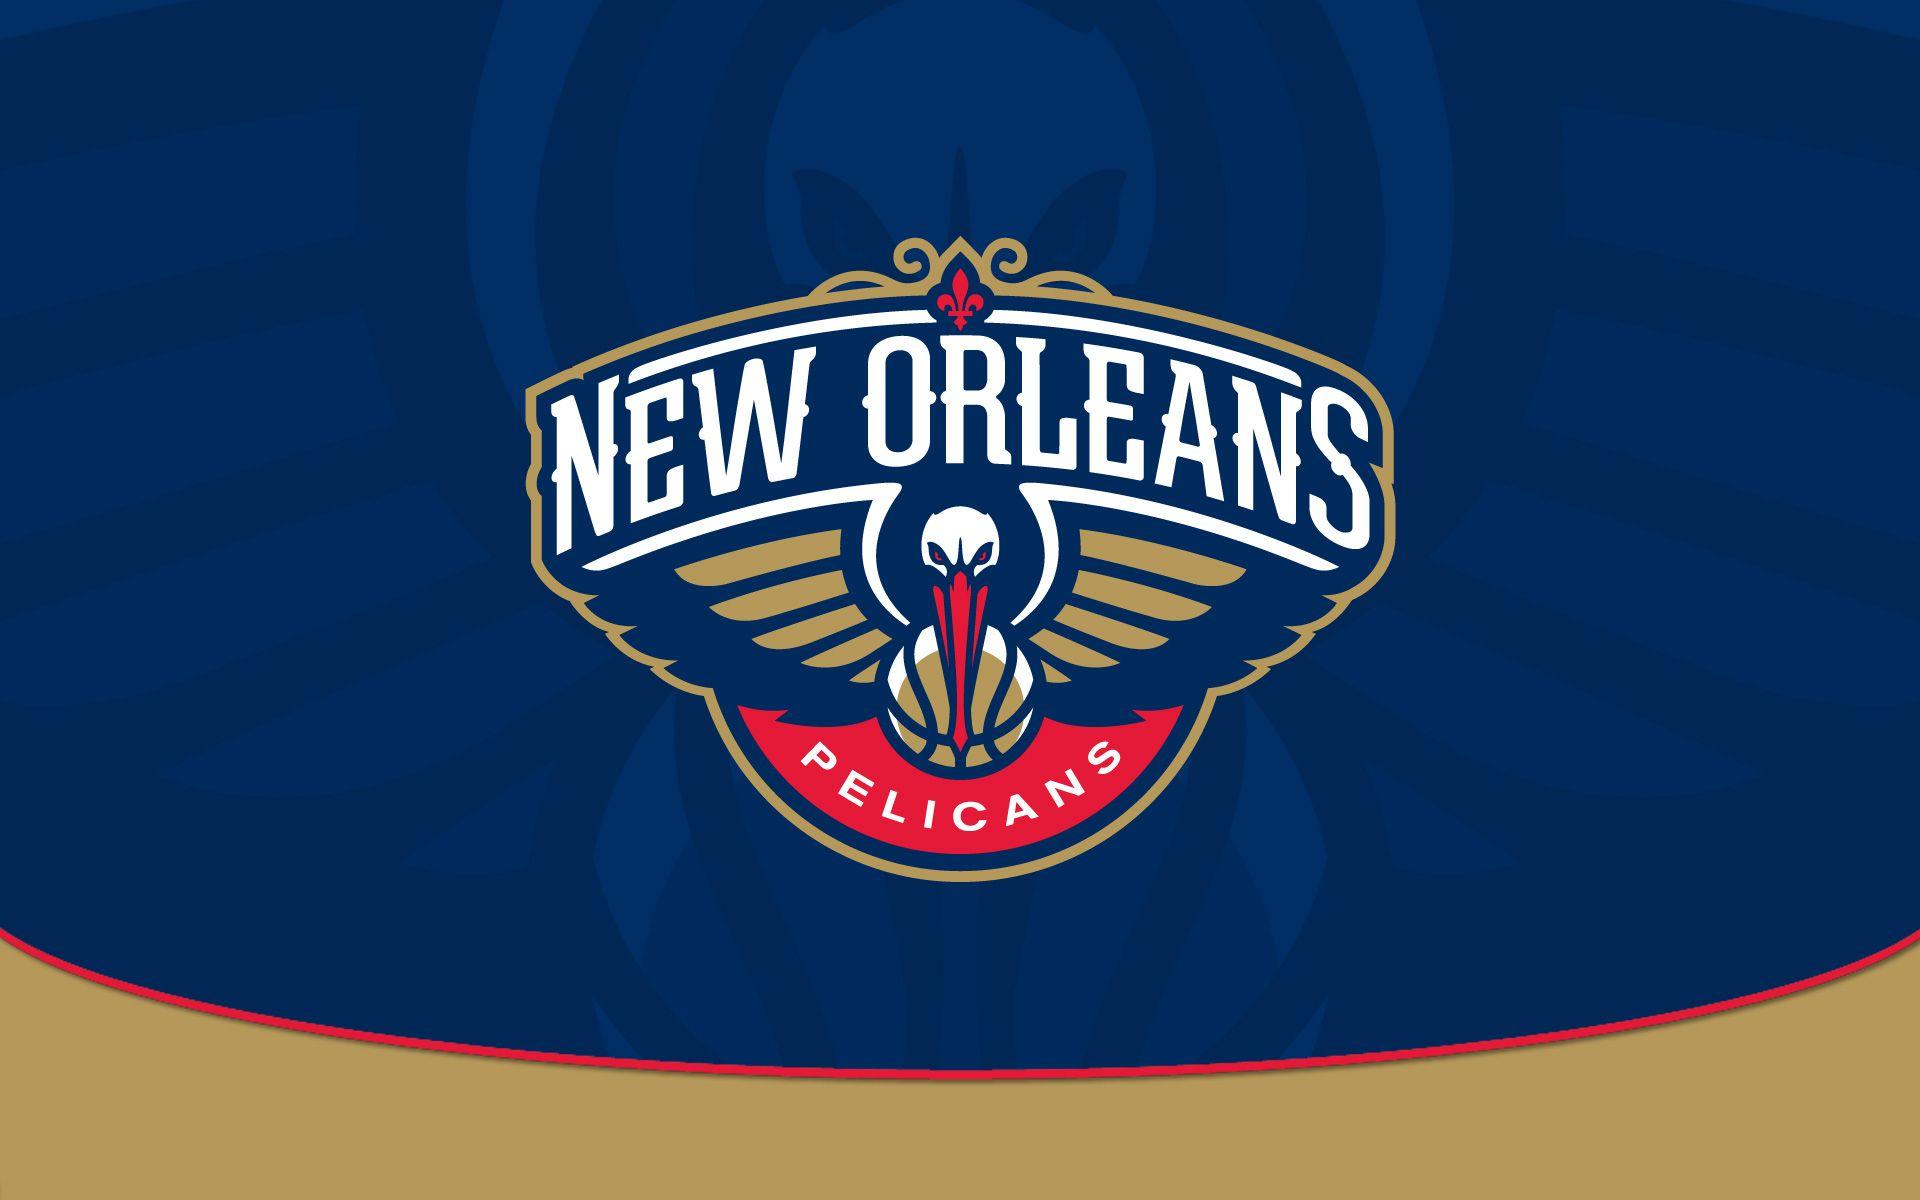 Orleans Logo - New Orleans Pelicans Logos Unveiled | New Orleans Pelicans